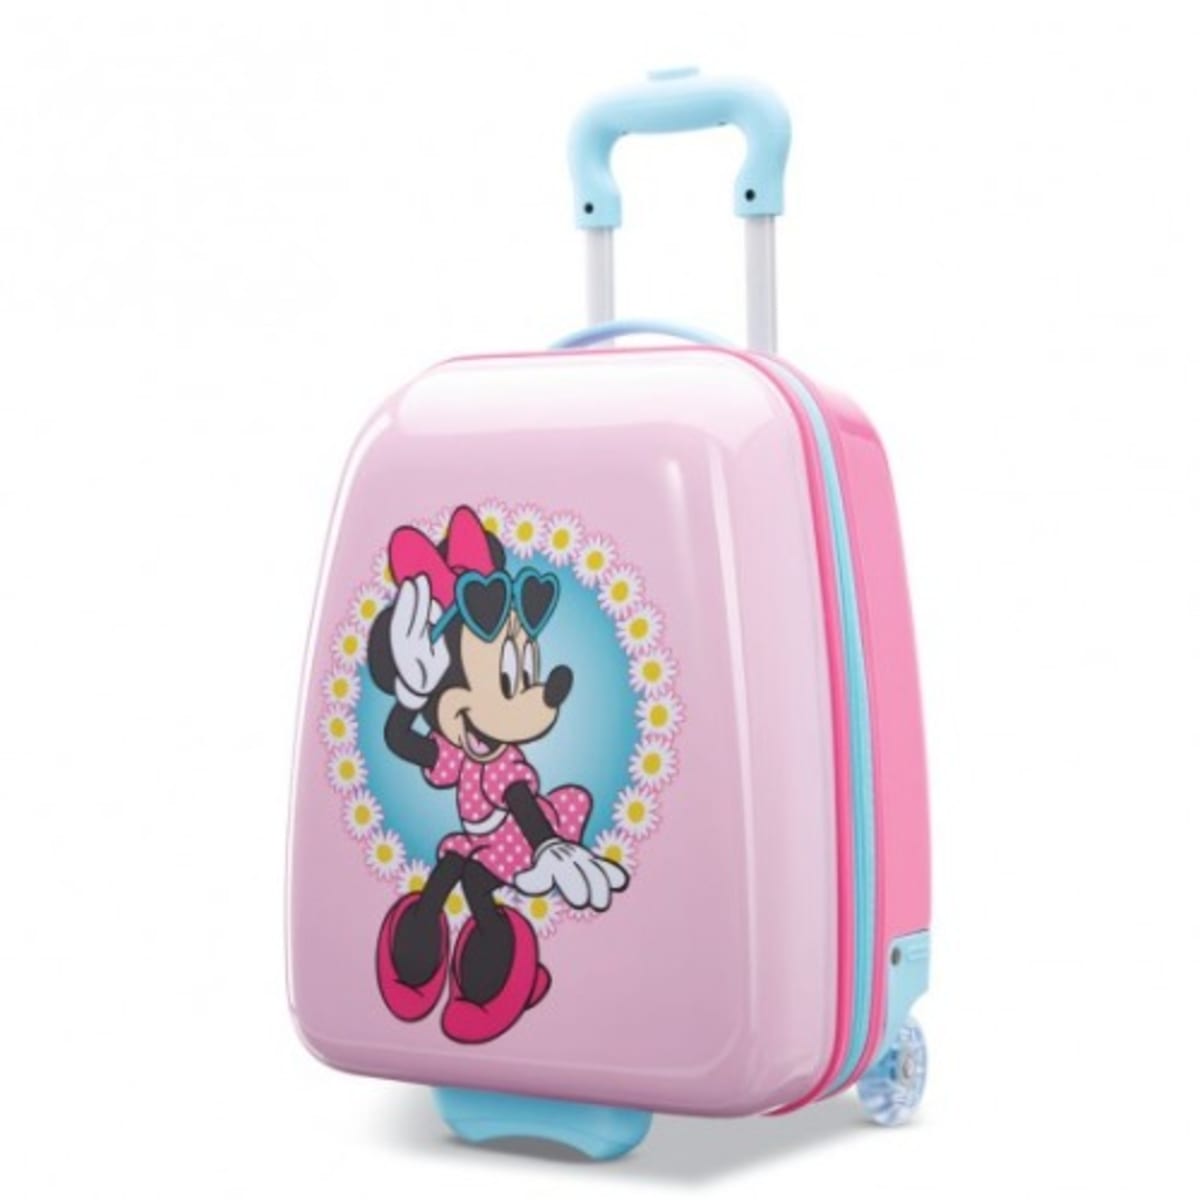 American Tourister Disney Backpack - Minnie 